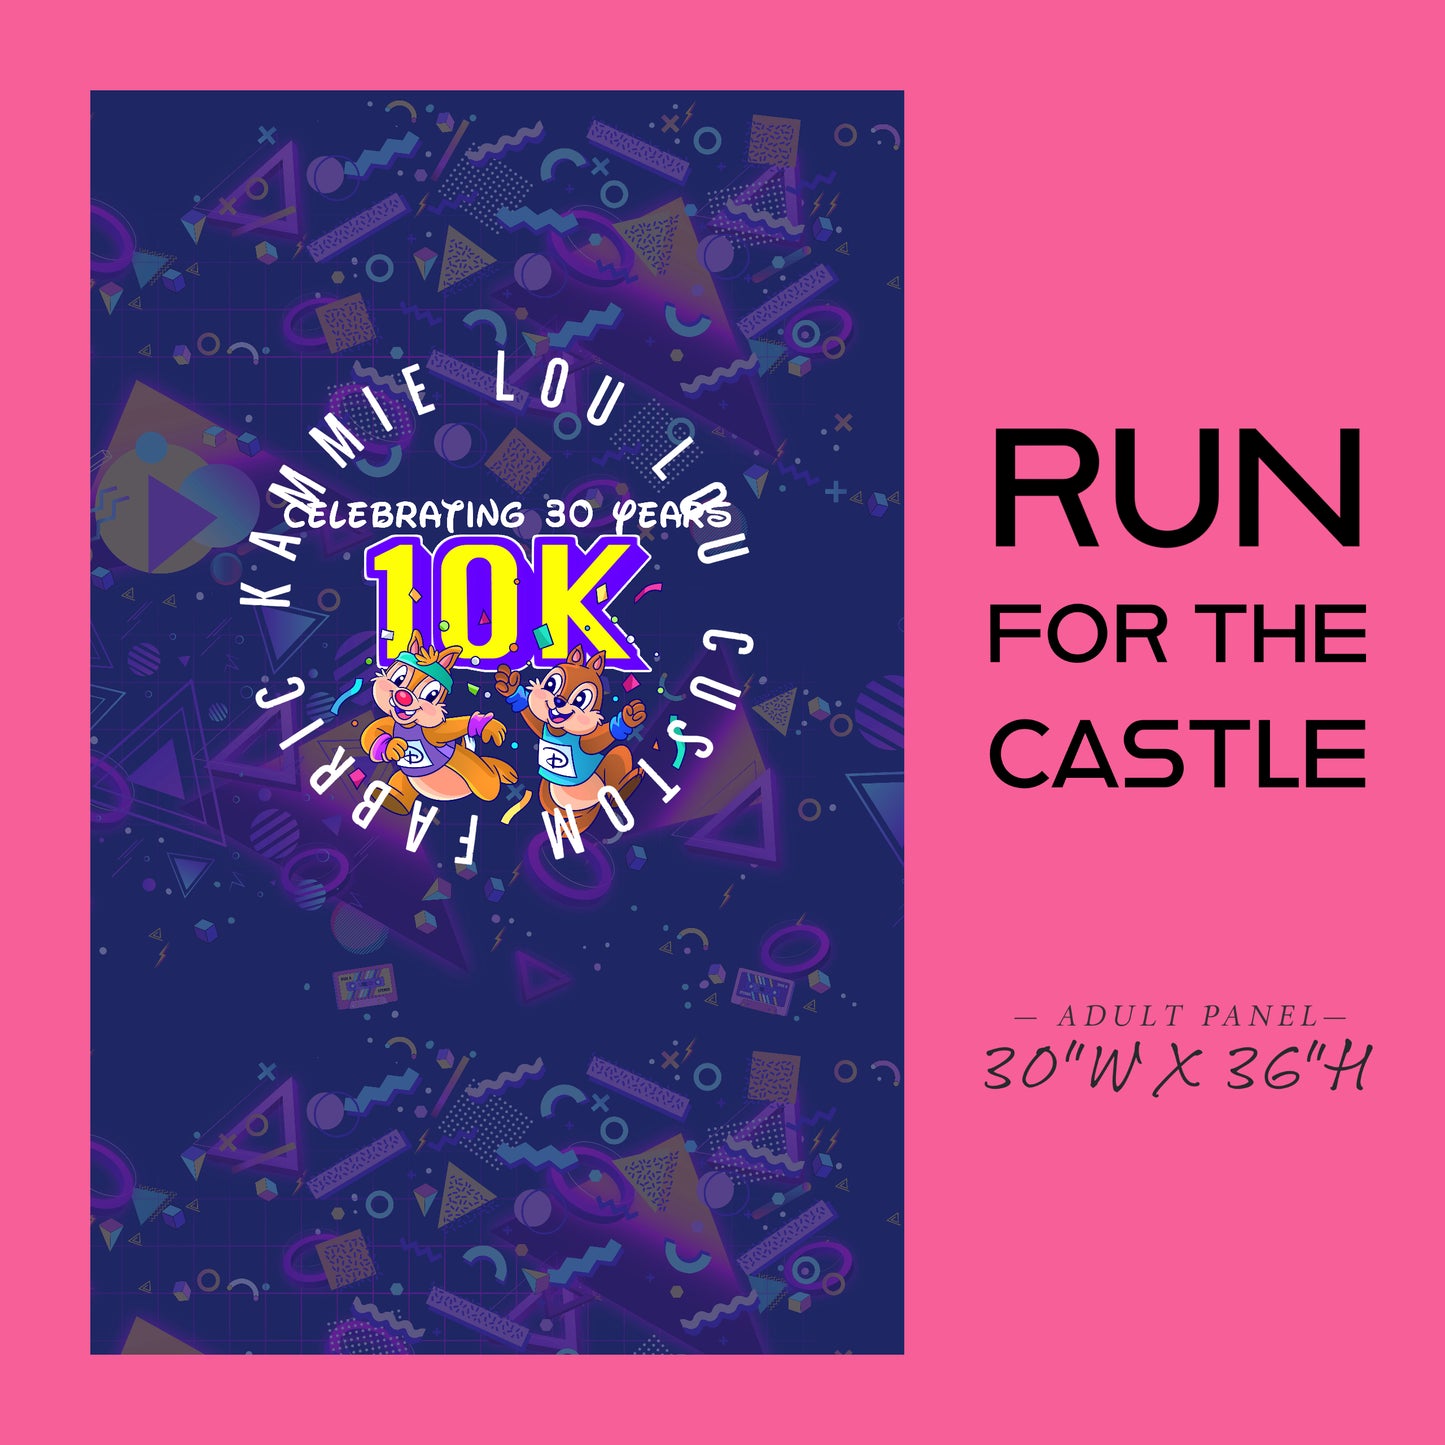 Special Pre-order Run for the Castle - Marathon - Cheers to 30 years - Panel - ADULT - 10K